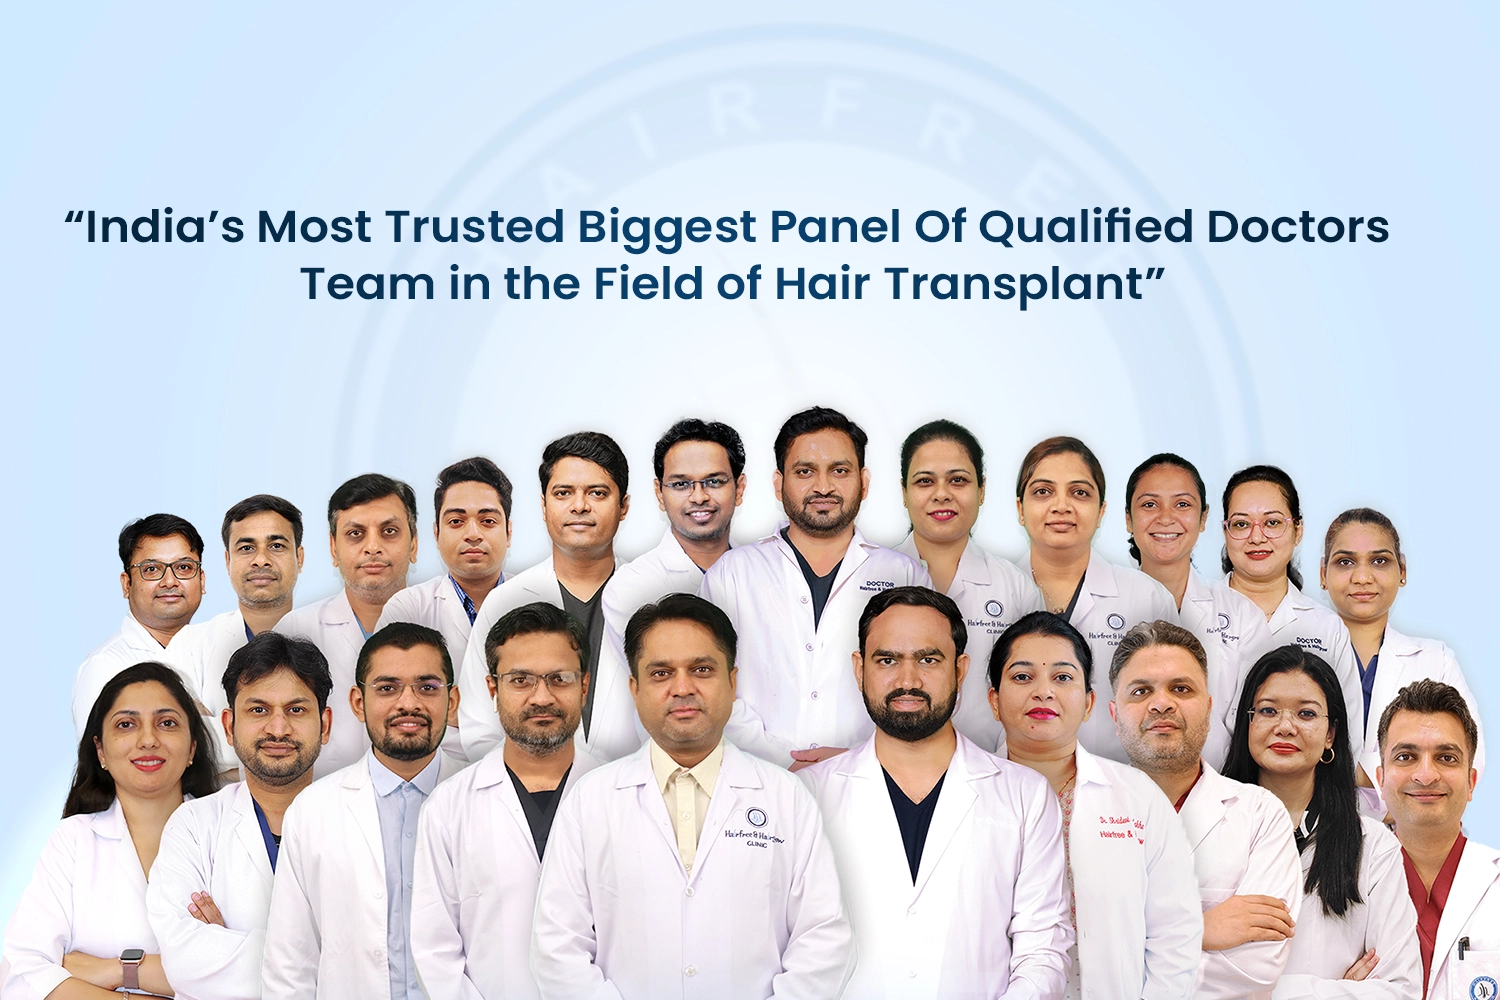 20+ hair doctors posing with title saying "India's most trusted biggest panel of qualified doctors team in the field of hair transplant"